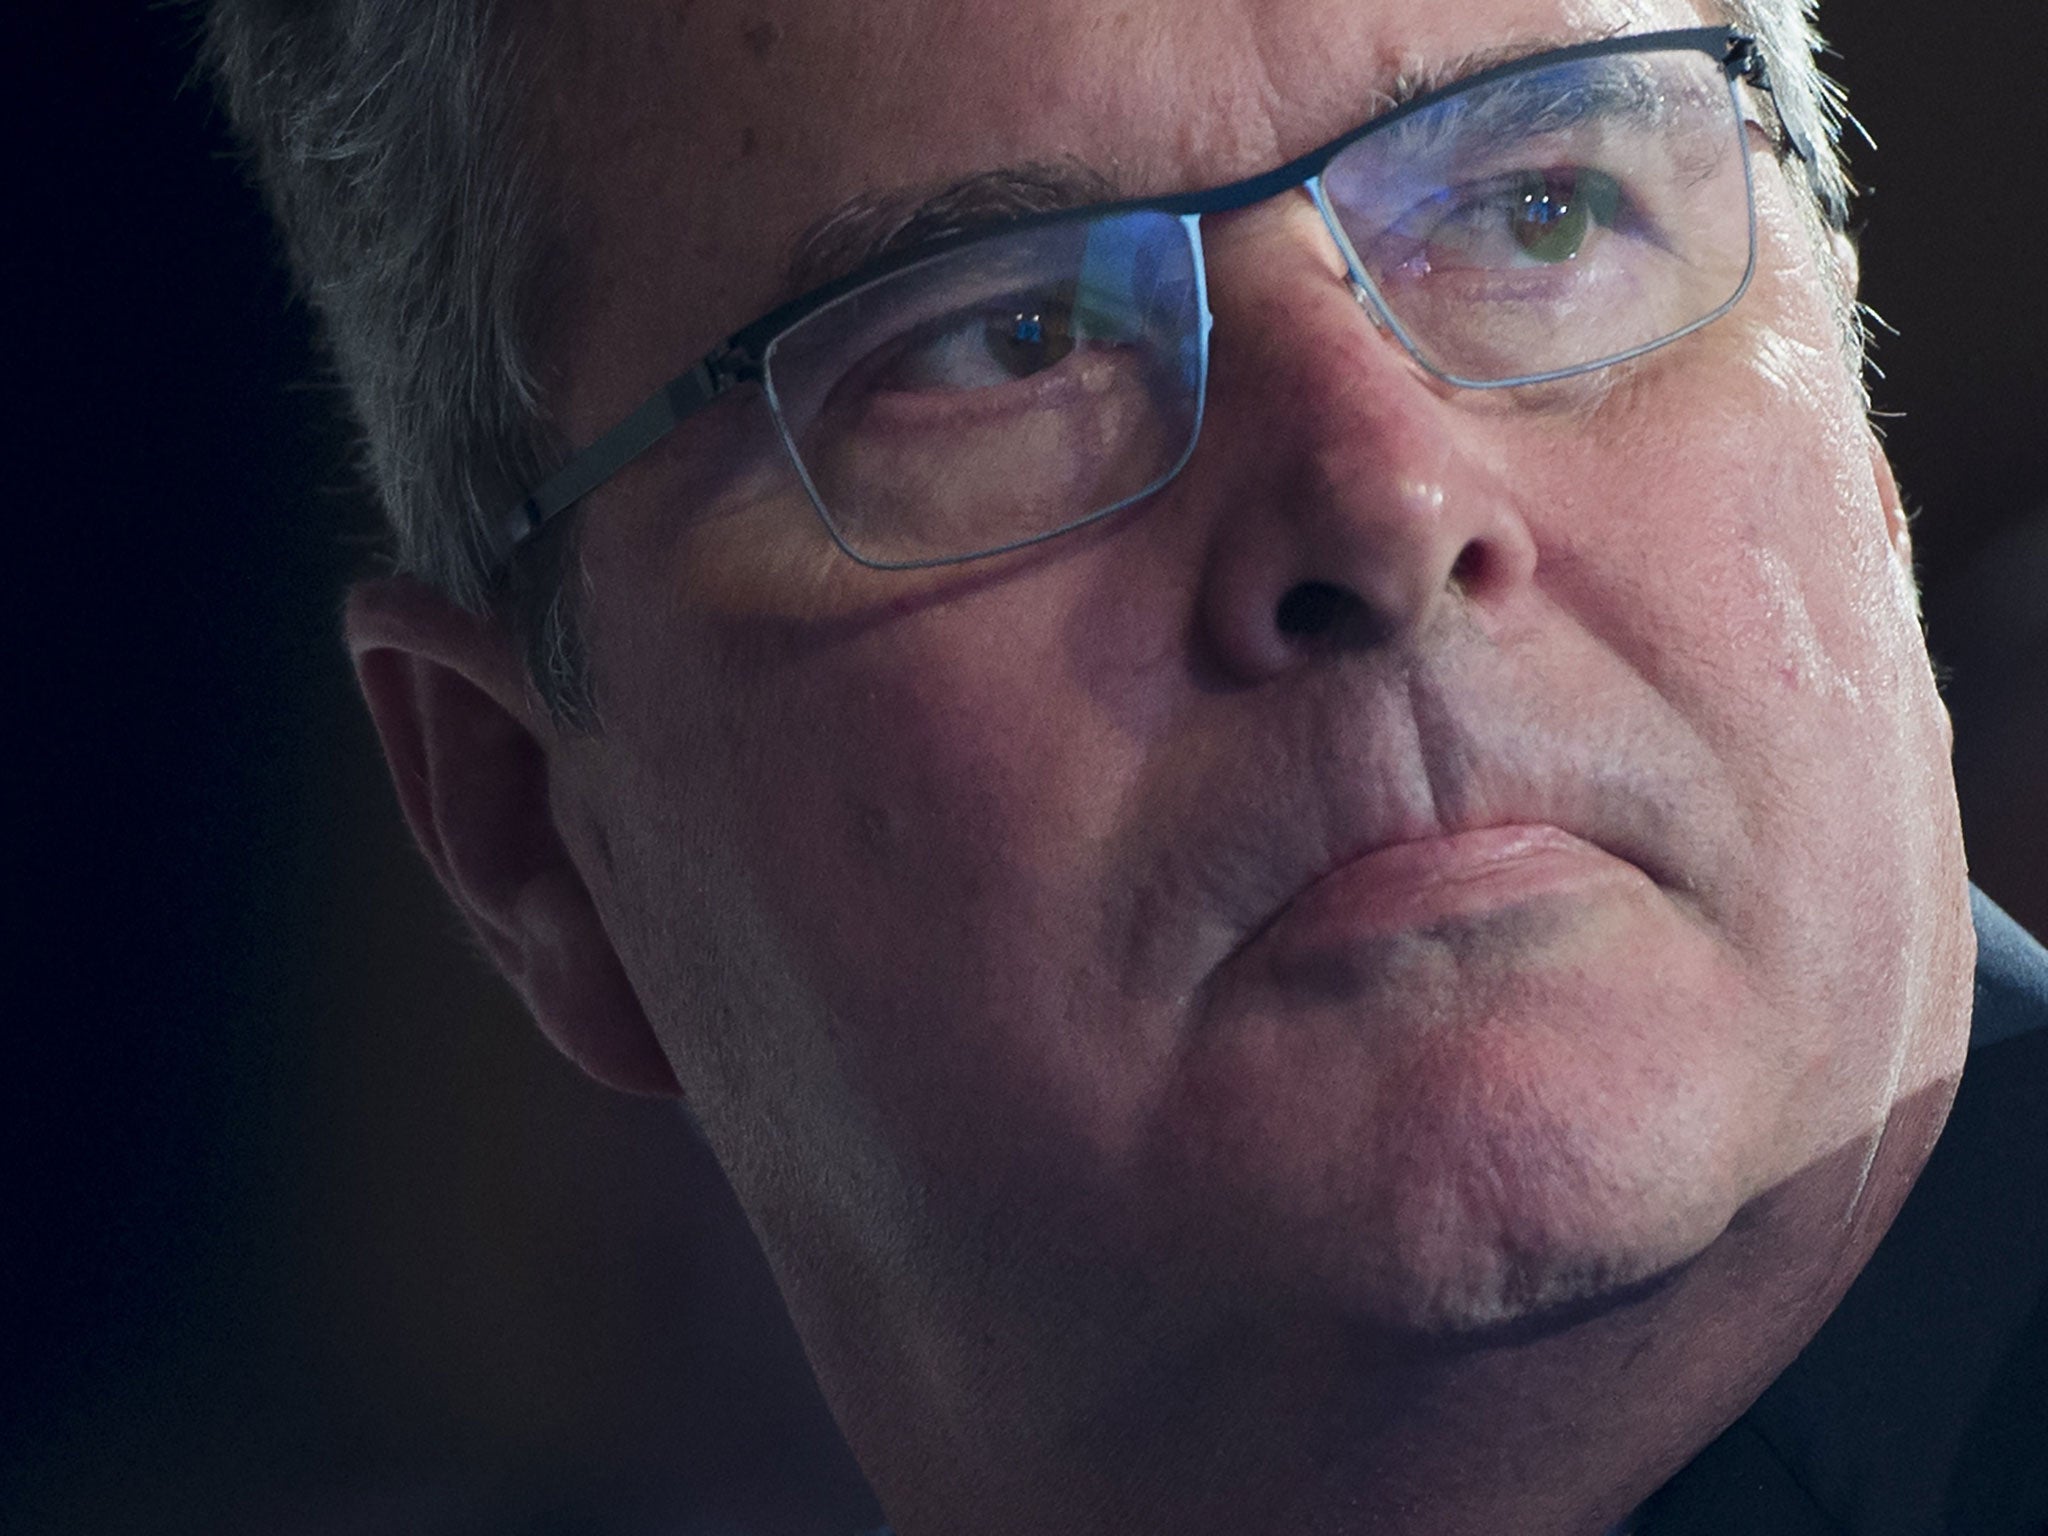 Former Florida Republican Governor Jeb Bush prior to speaking at the 2014 National Summit on Education Reform in Washington, DC, November 20, 2014.